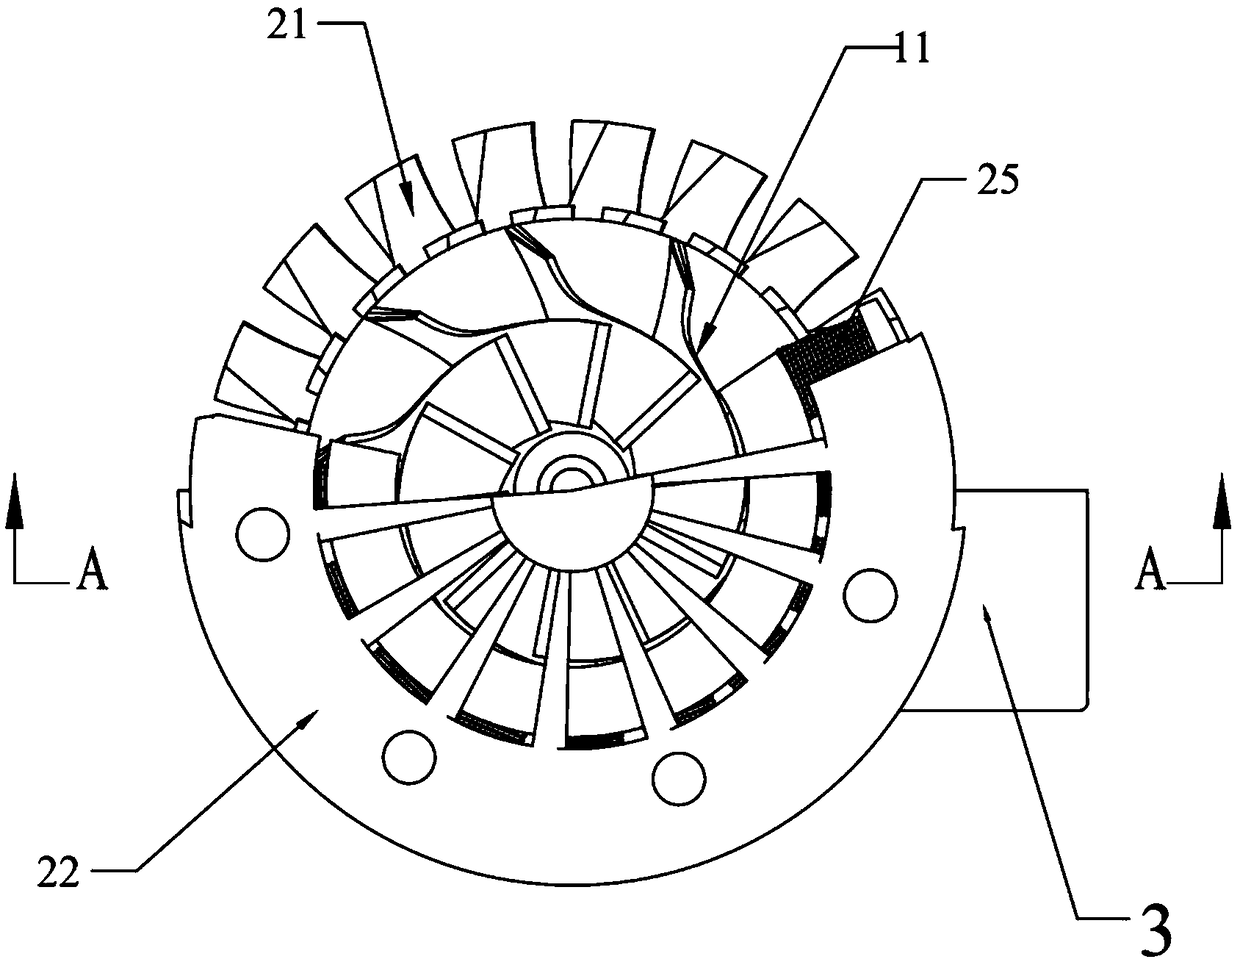 Power system used in large multi-rotor aircraft capable of precisely adjusting speed